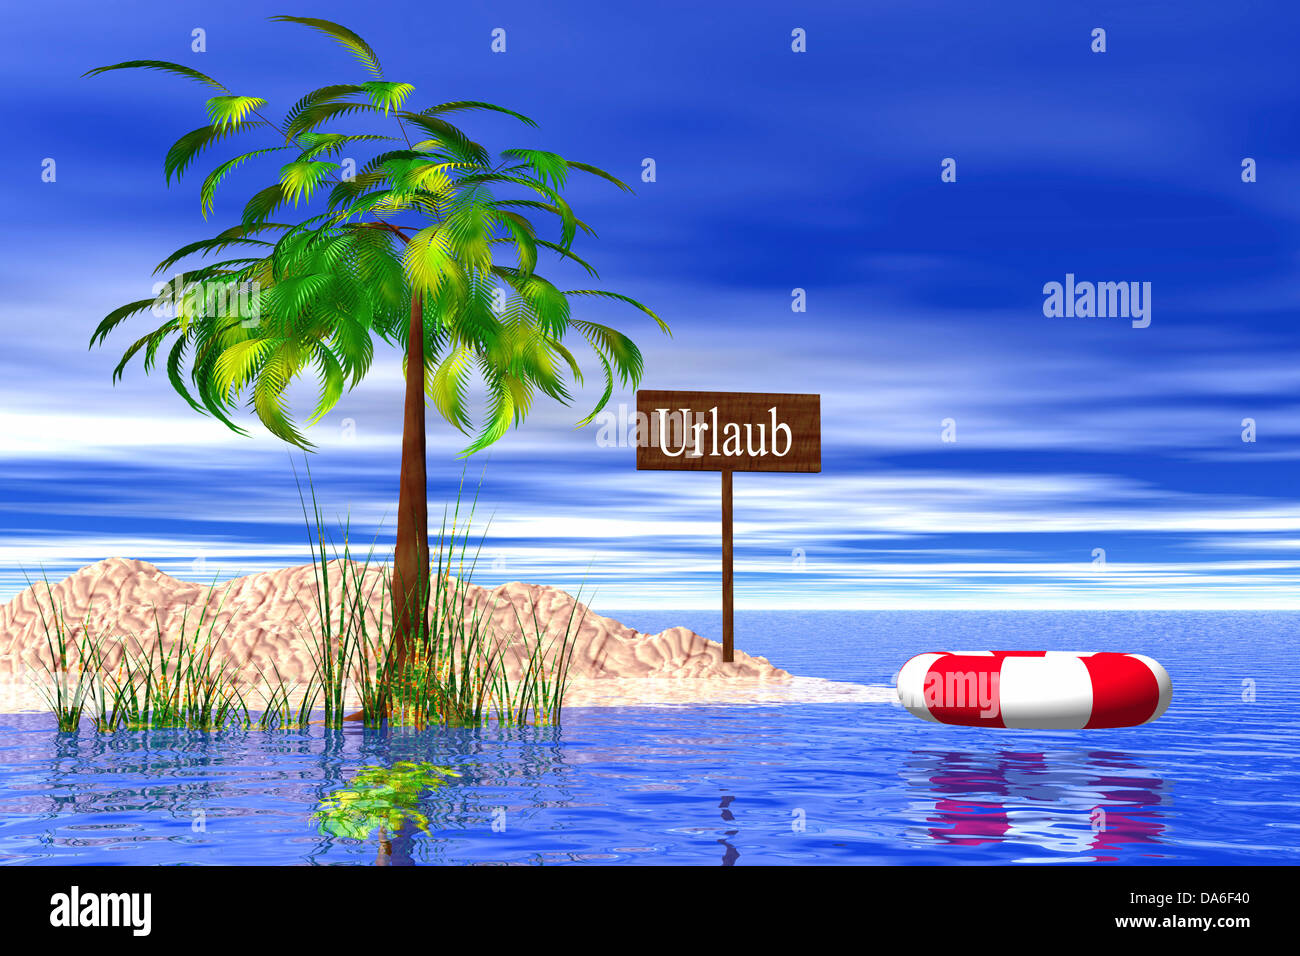 Small holiday island with sign 'Urlaub', German for 'holiday', palm tree and lifebuoy, illustration Stock Photo